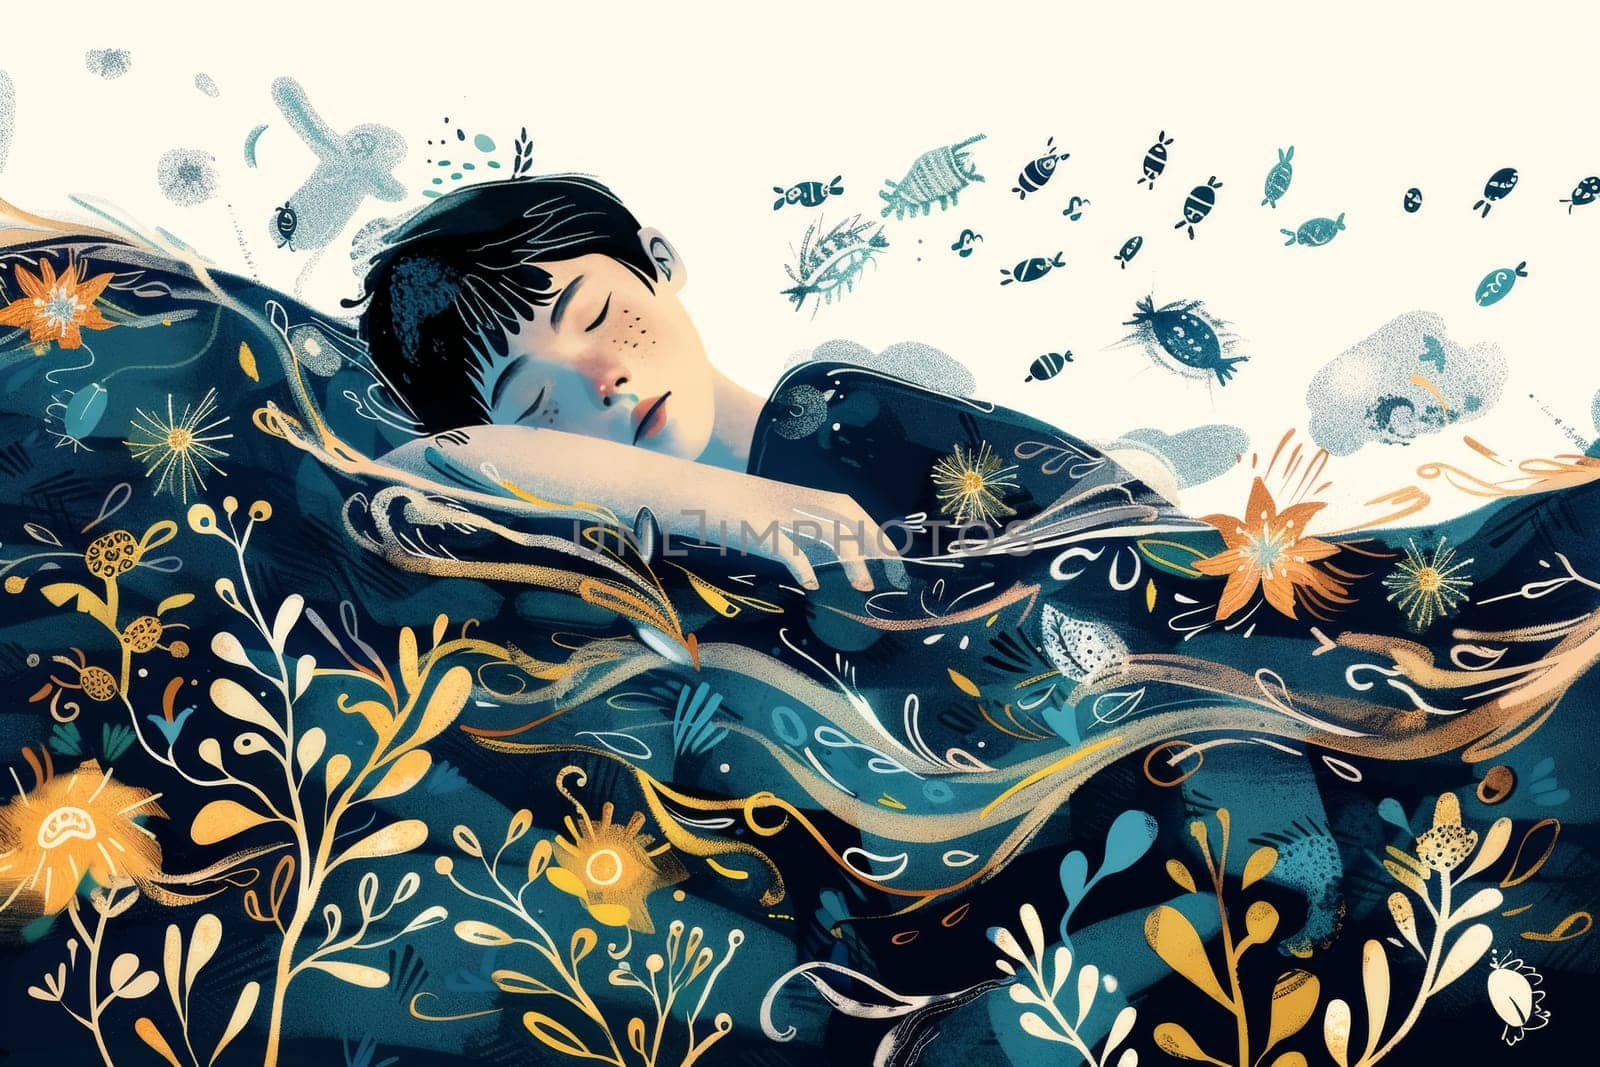 Artistic illustration of a child sleeping with underwater flora and fauna. by andreyz